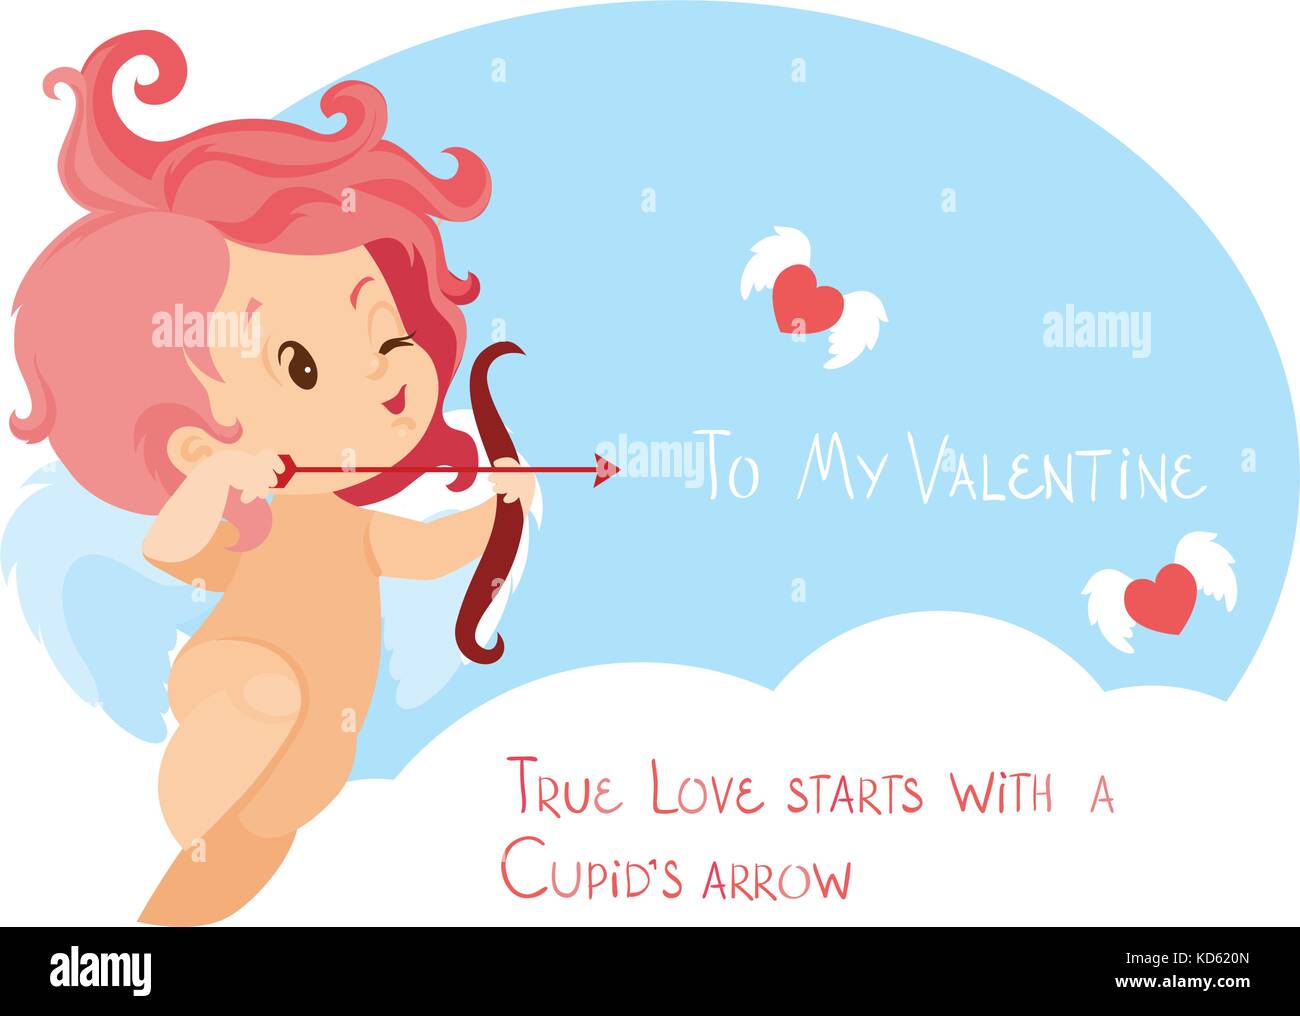 Cupid hunting with archer bow flying hearts. Handwritten fun quotation Valentines Day message Stock Vector